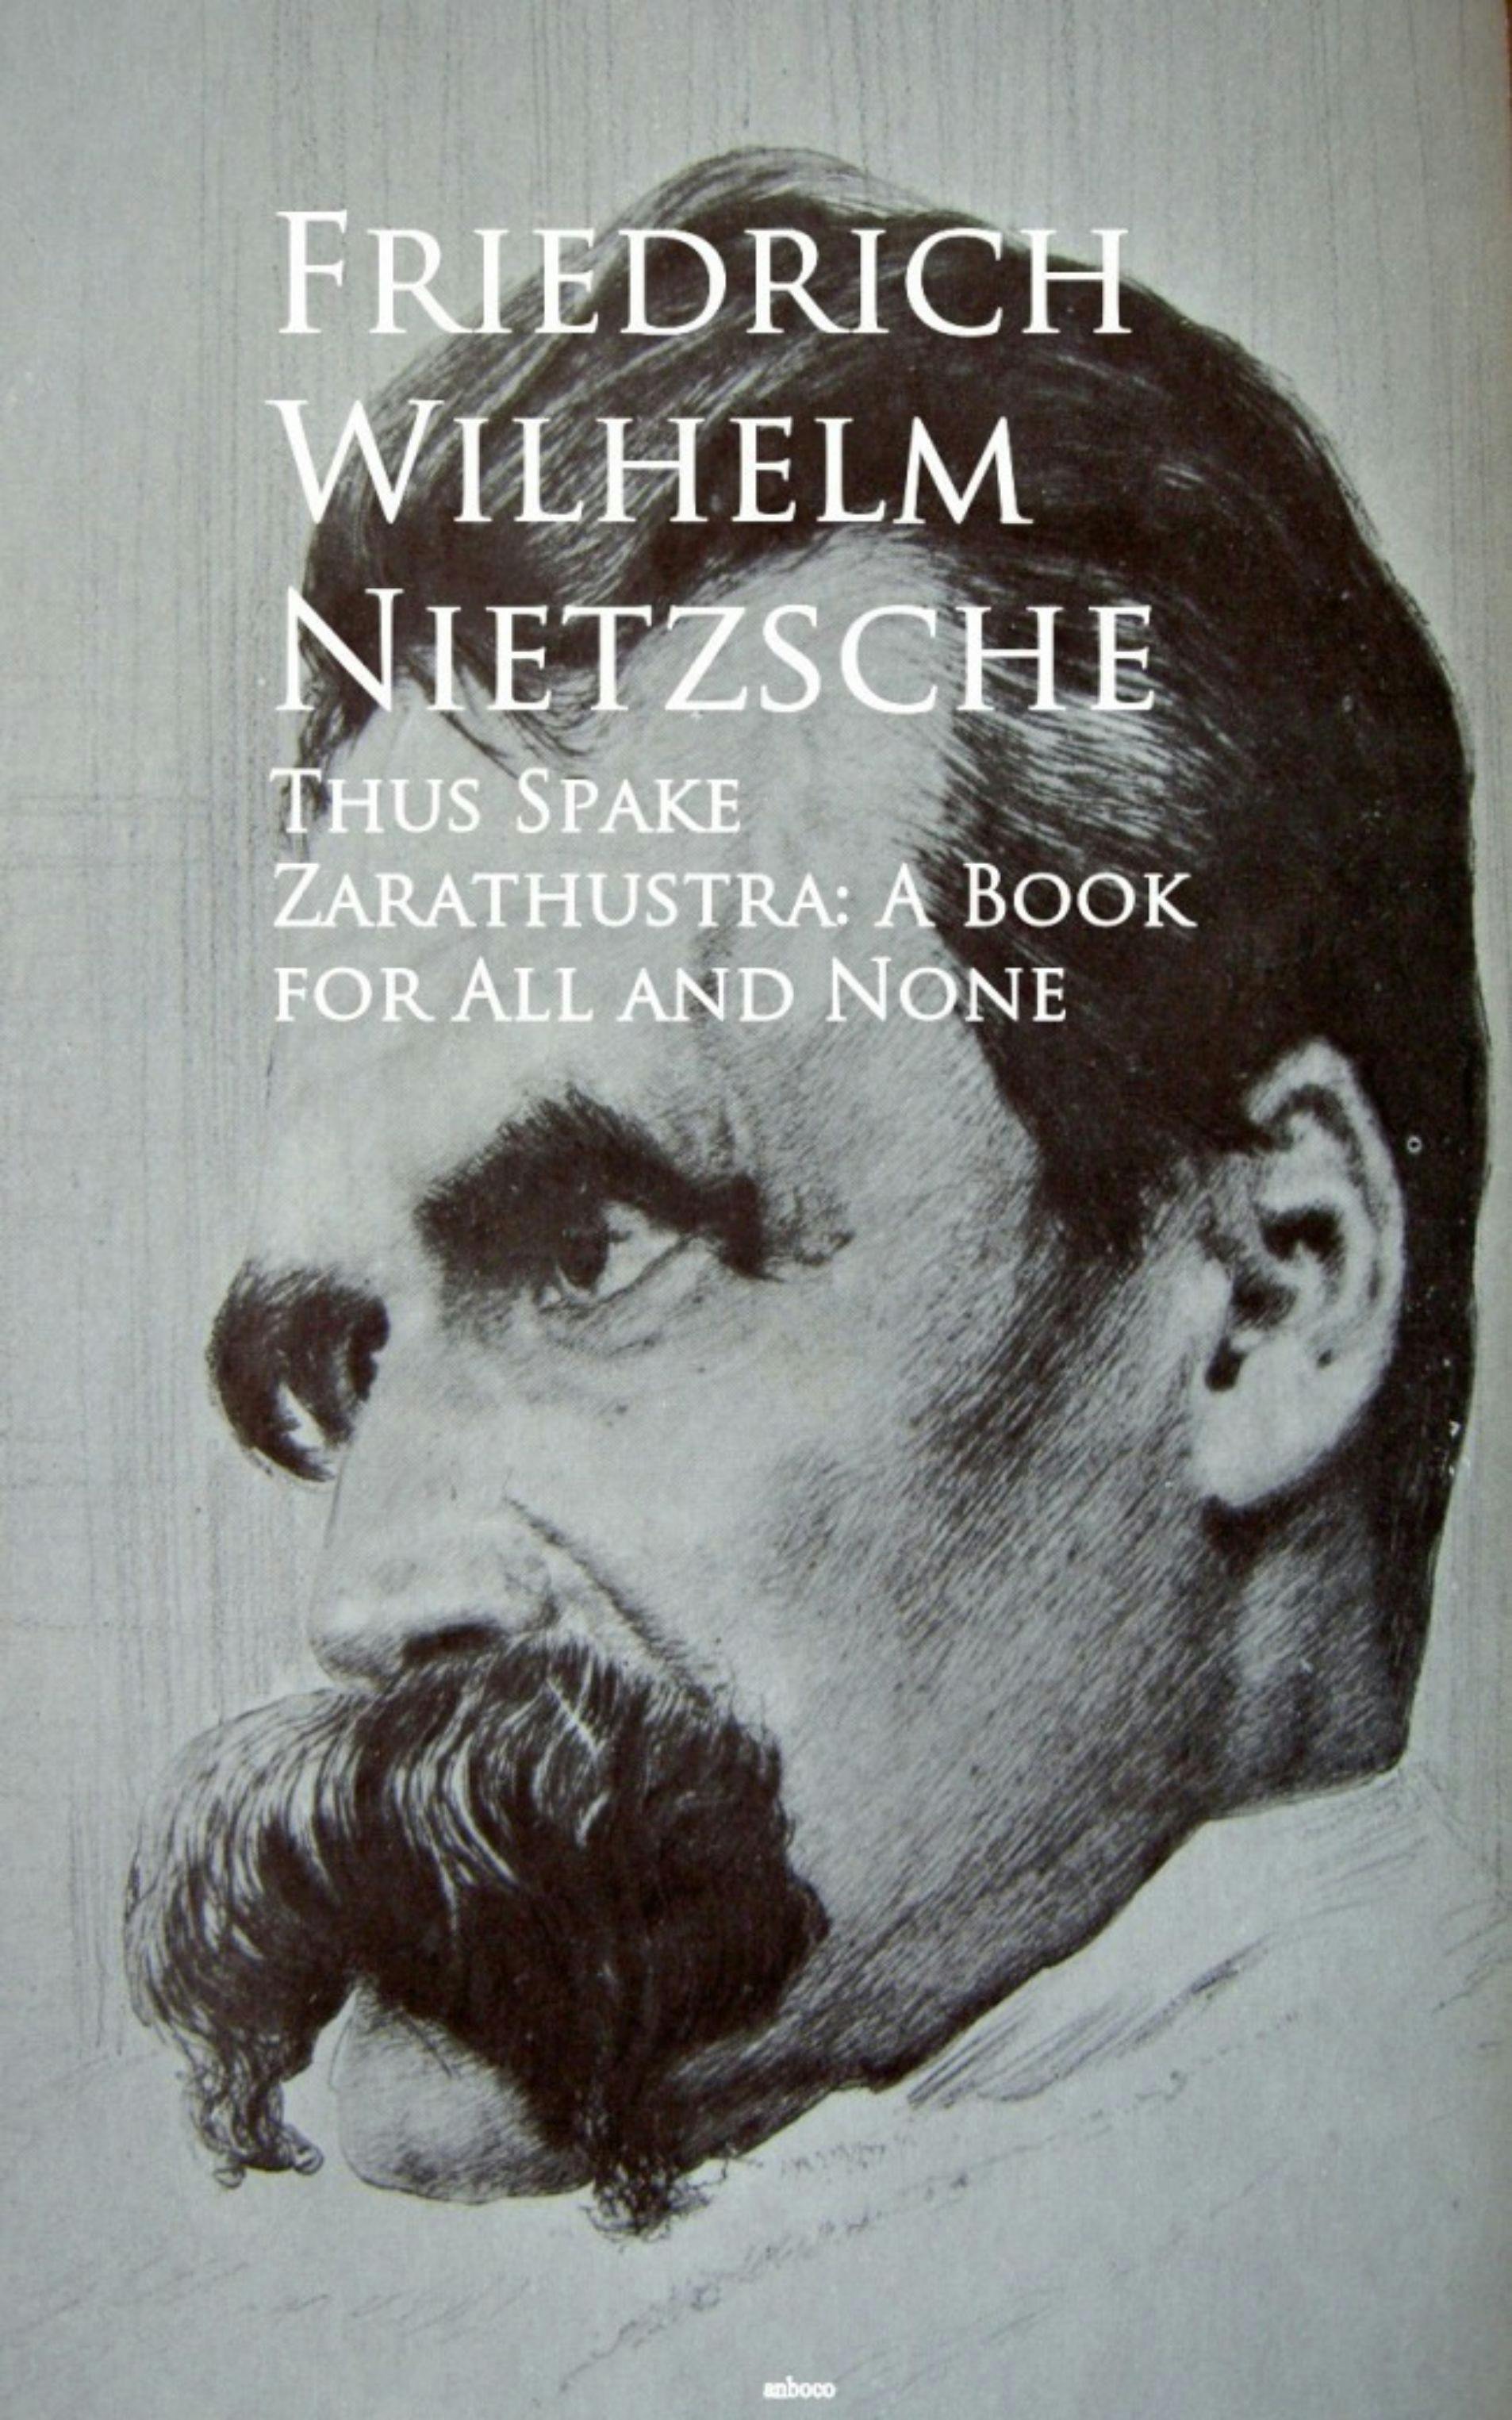 Thus Spake Zarathustra: A Book for All and None: Bestsellers and famous Books - Friedrich Wilhelm Nietzsche